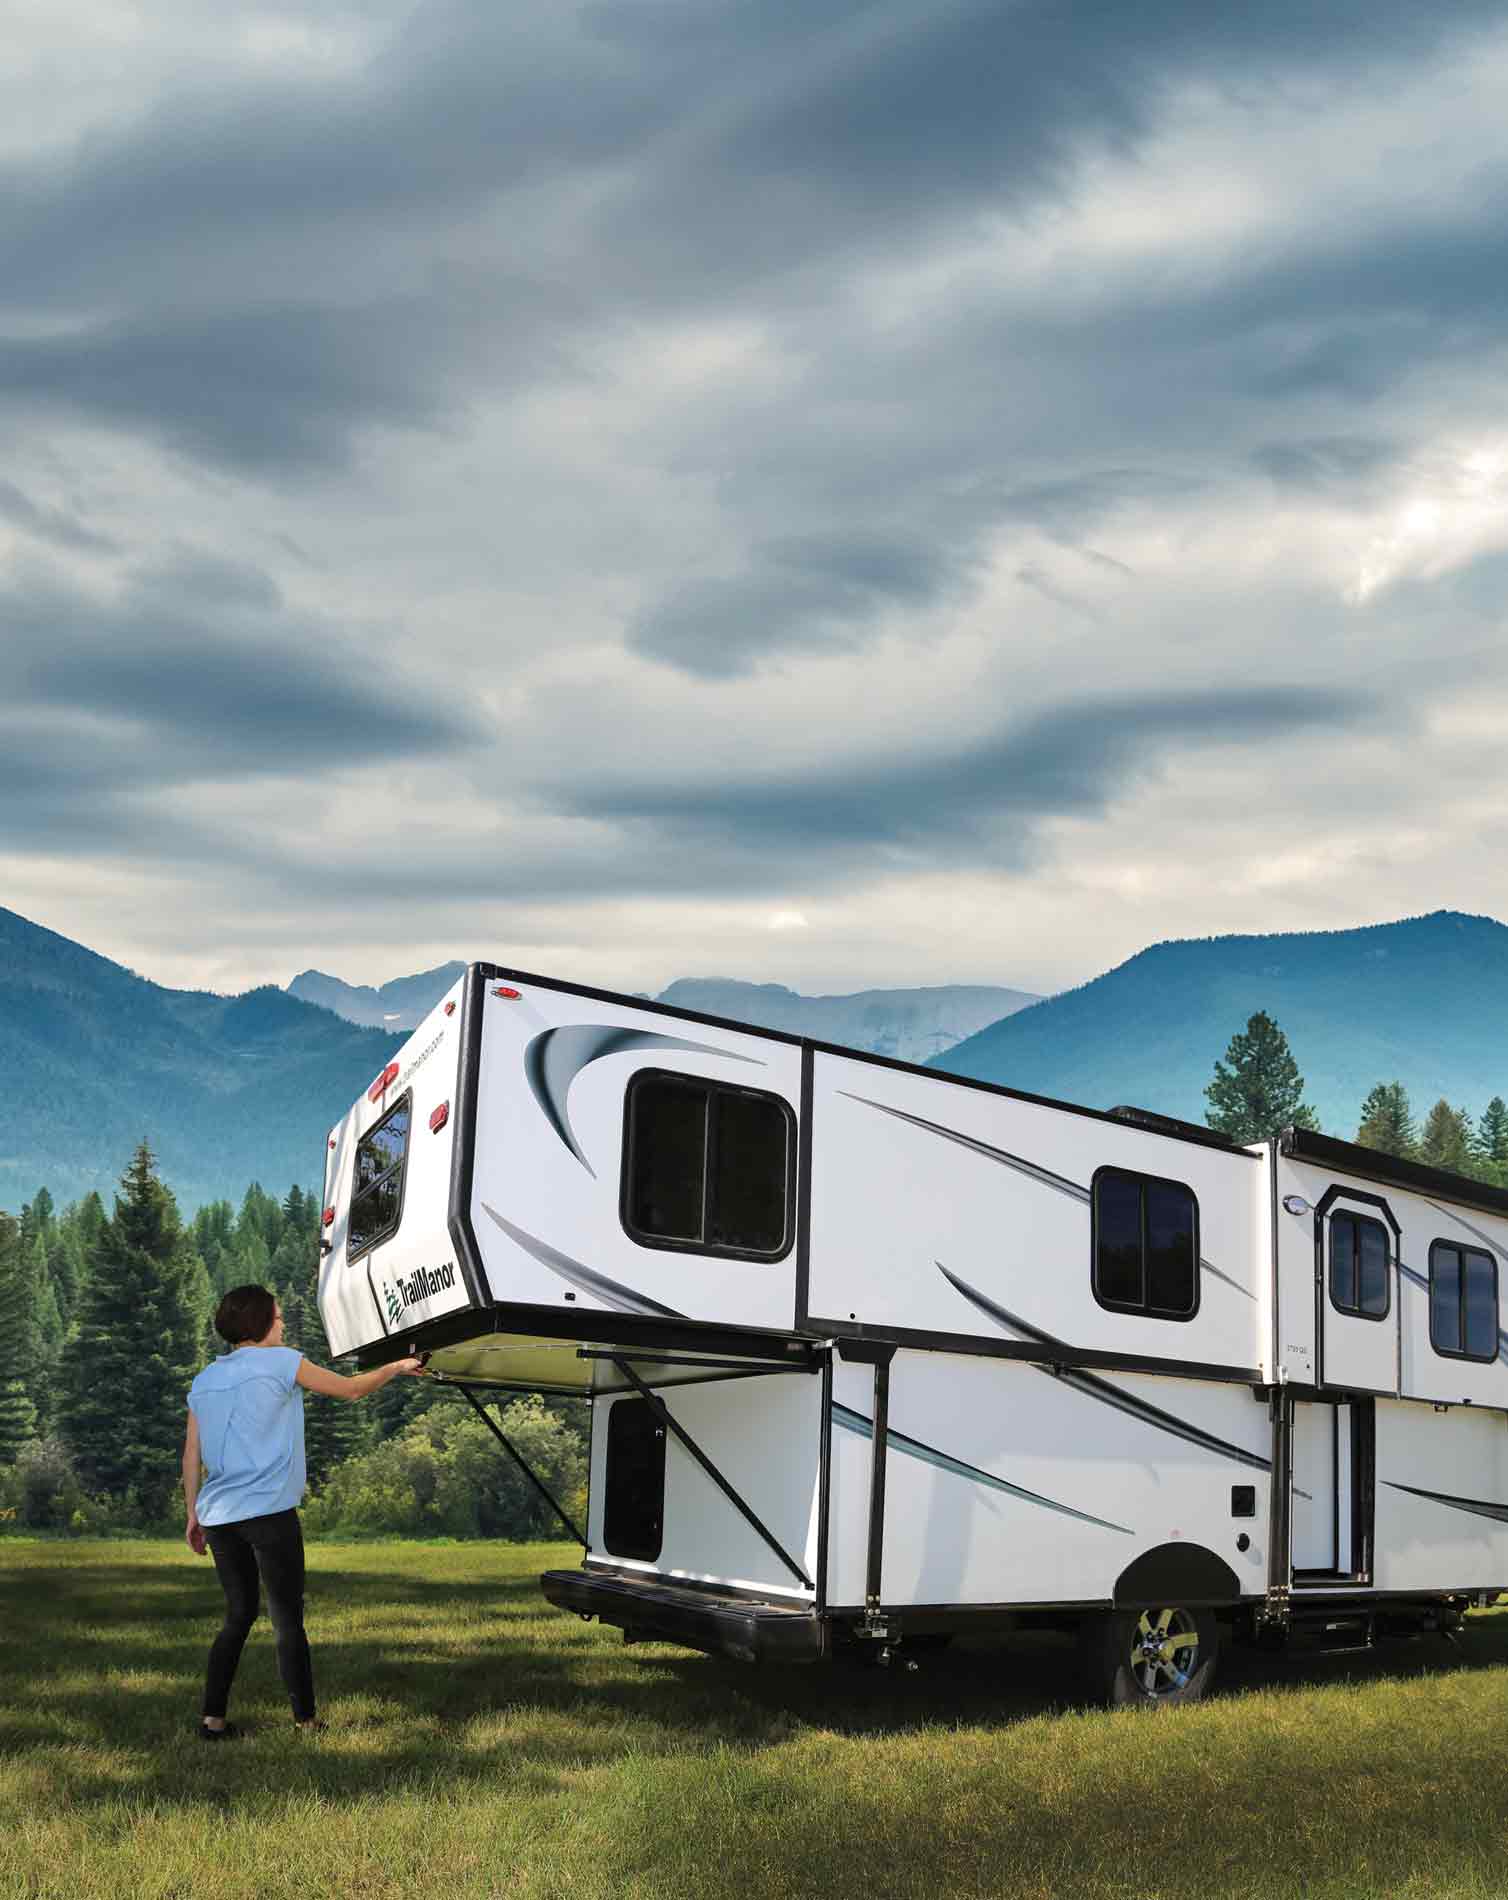 who manufactures trailmanor travel trailers